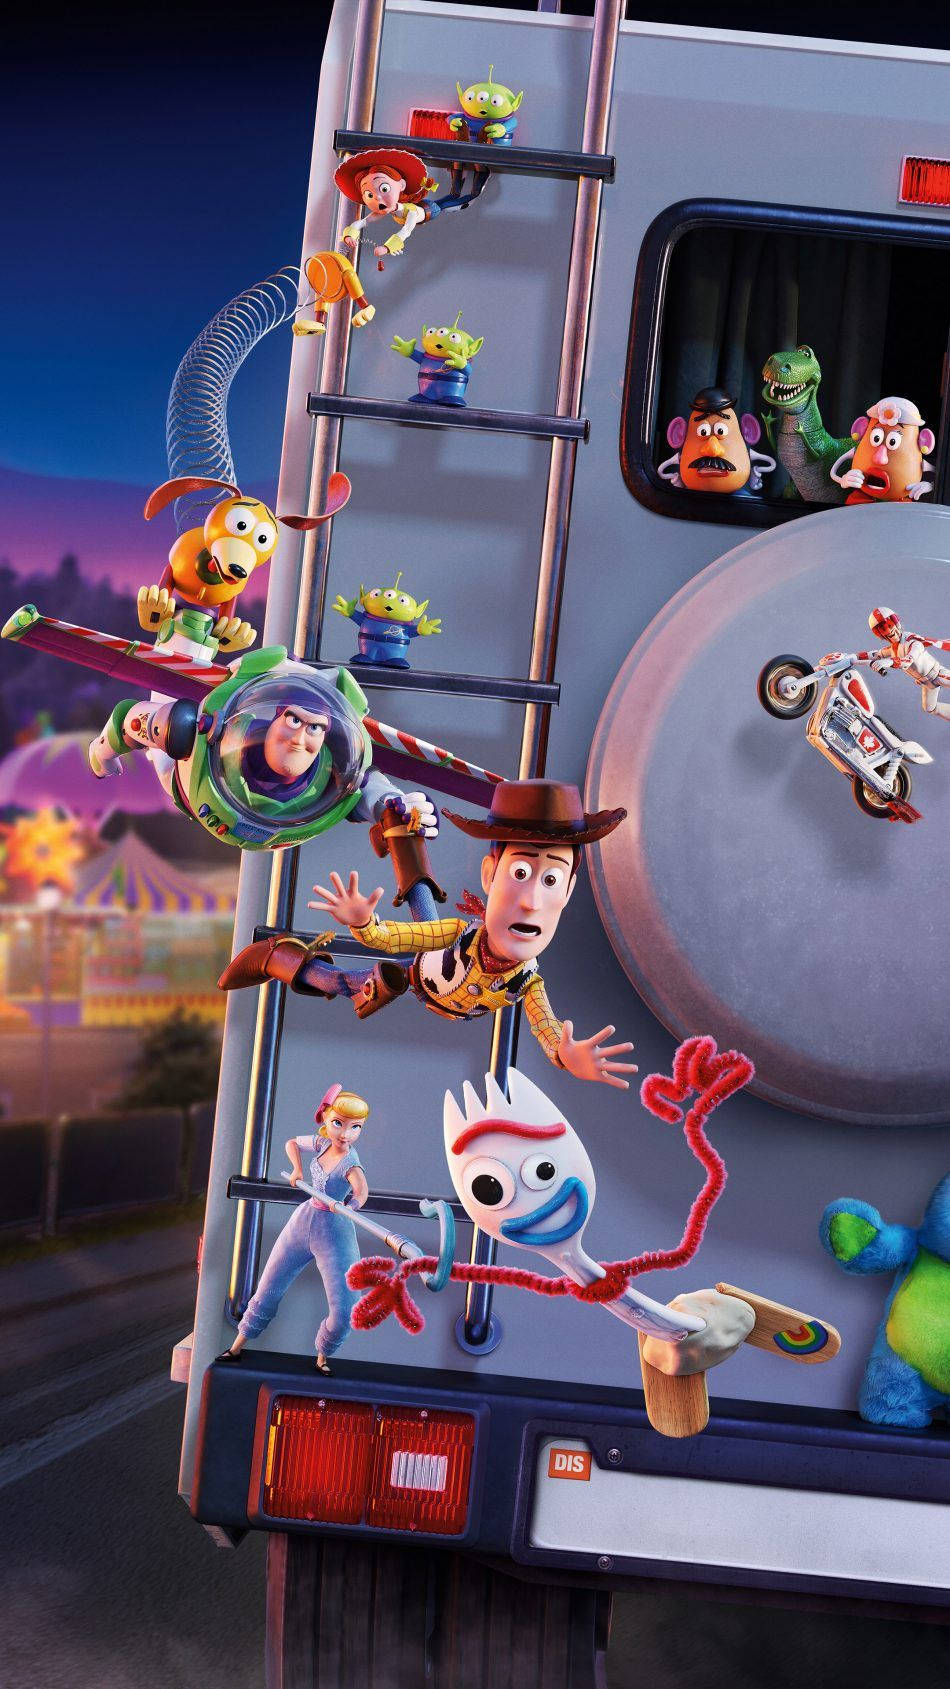 Woody and Forky embark on a new adventure for all of Andy's old toys in Toy Story 4. Wallpaper